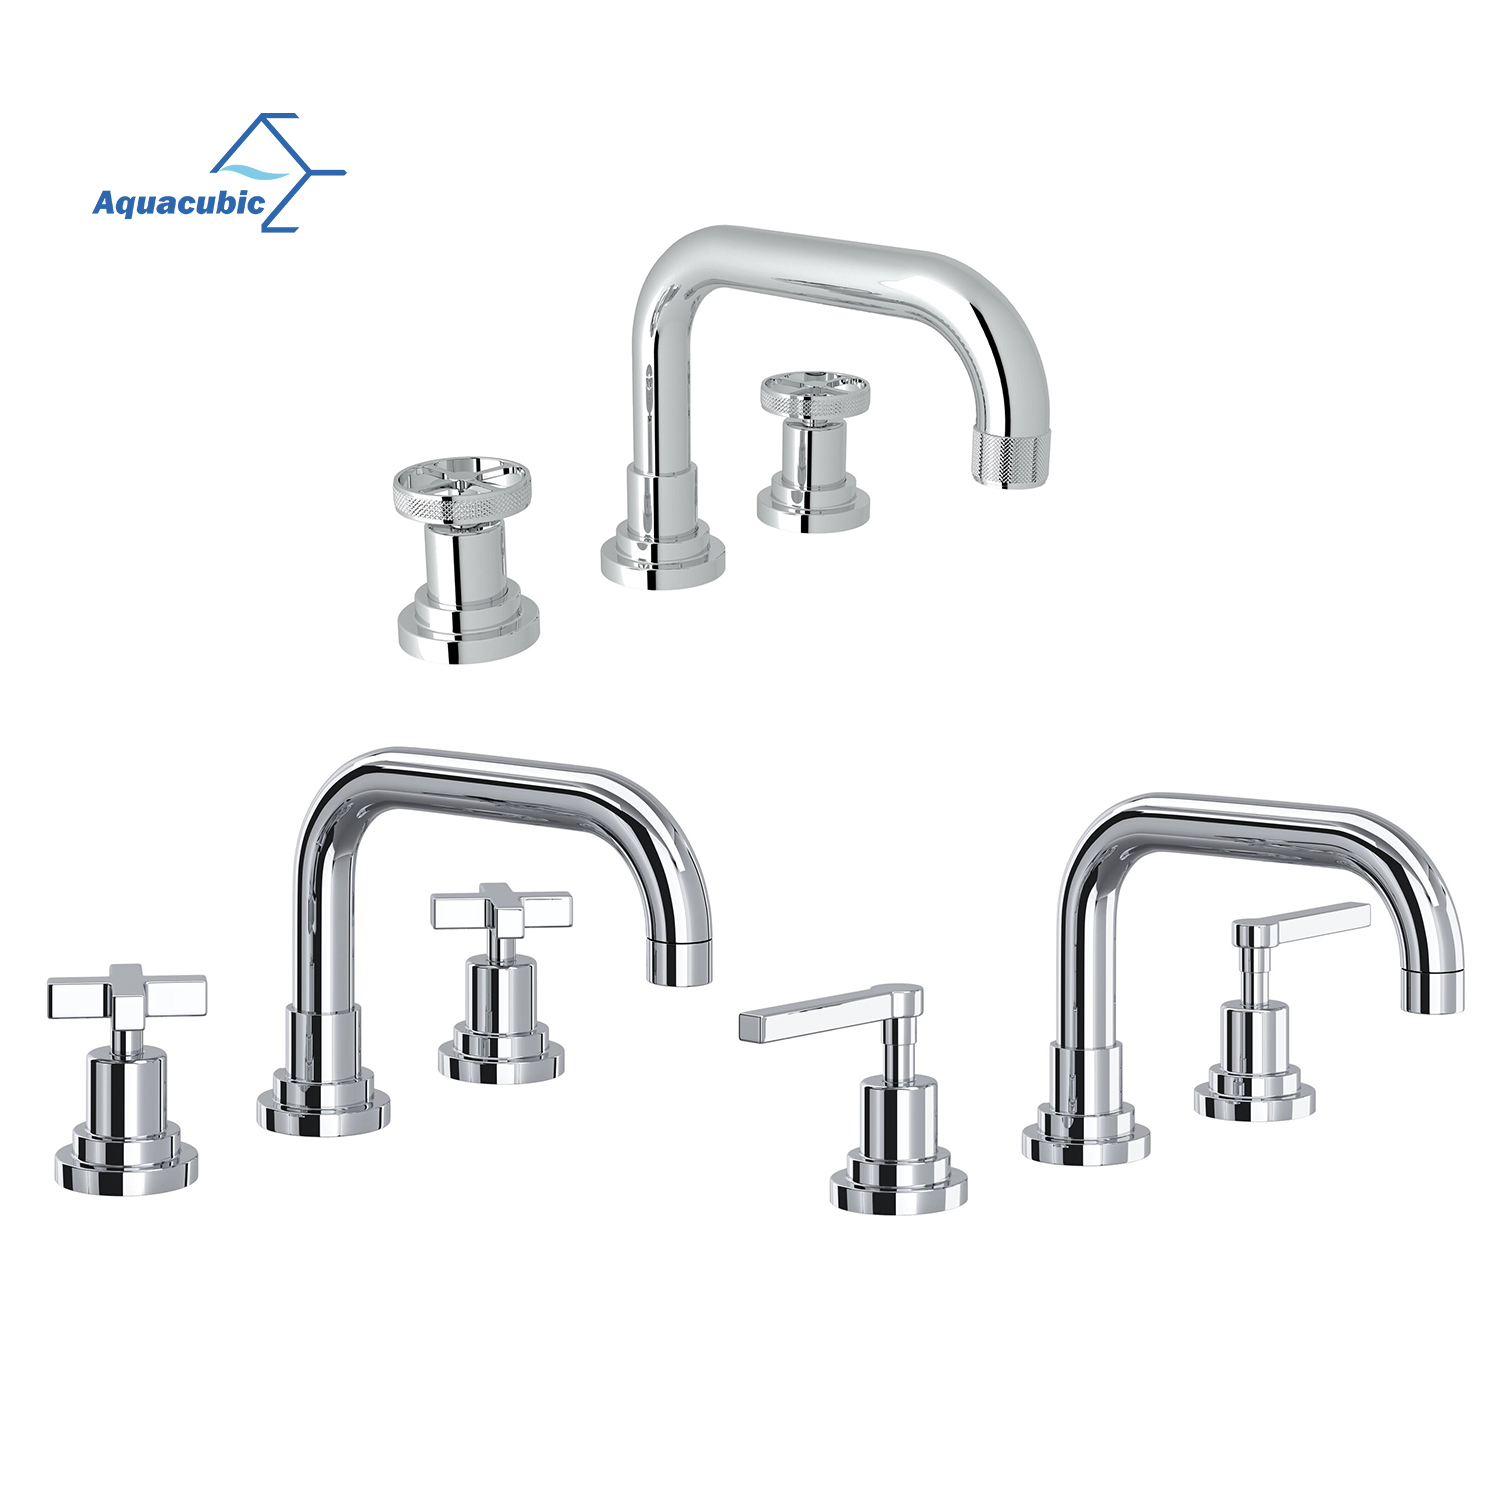 Aquacubic Luxury Deck Mounted Industrial Bathroom Faucet for 3-Holes 8-in Wide Spread Set